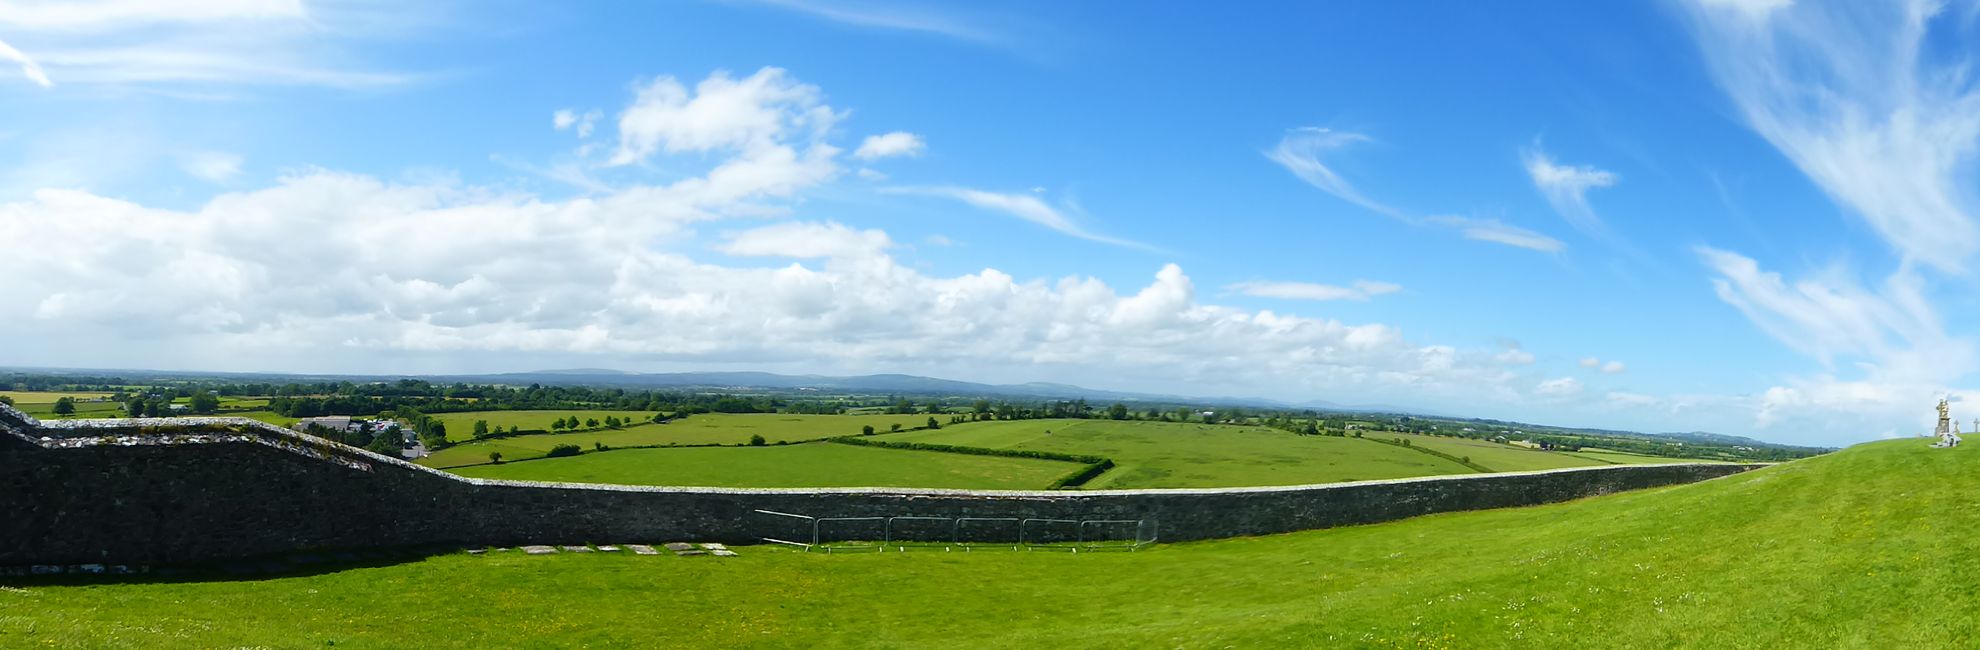 View from the Rock of Cashel